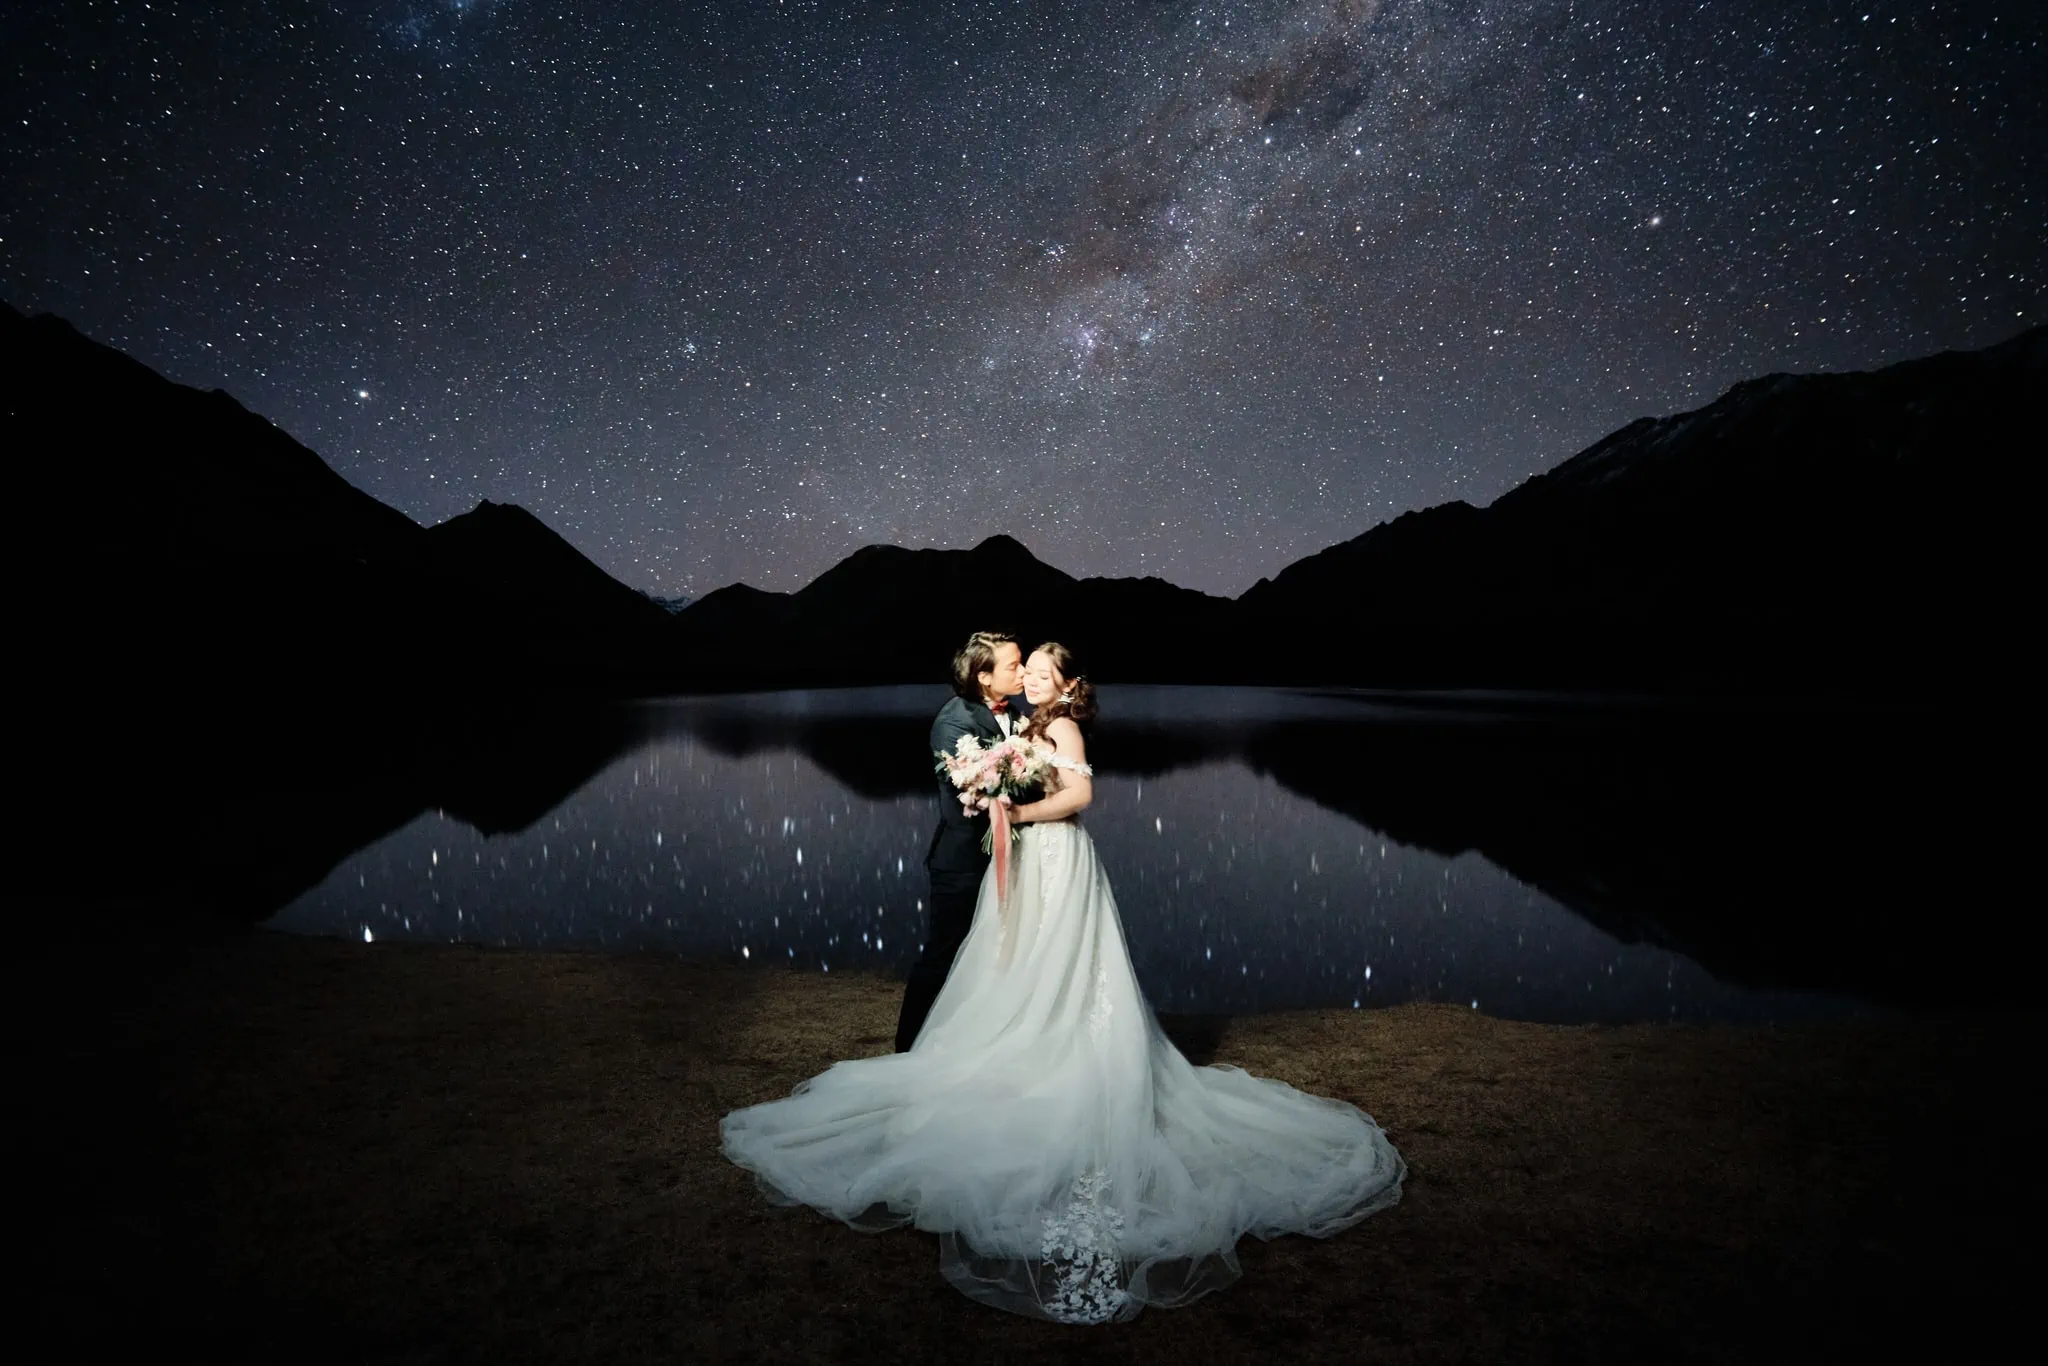 Queenstown New Zealand Elopement Wedding Photographer - A stunning starry night shoot featuring a bride and groom standing under the milky way in front of a lake, beautifully captured for our portfolio.